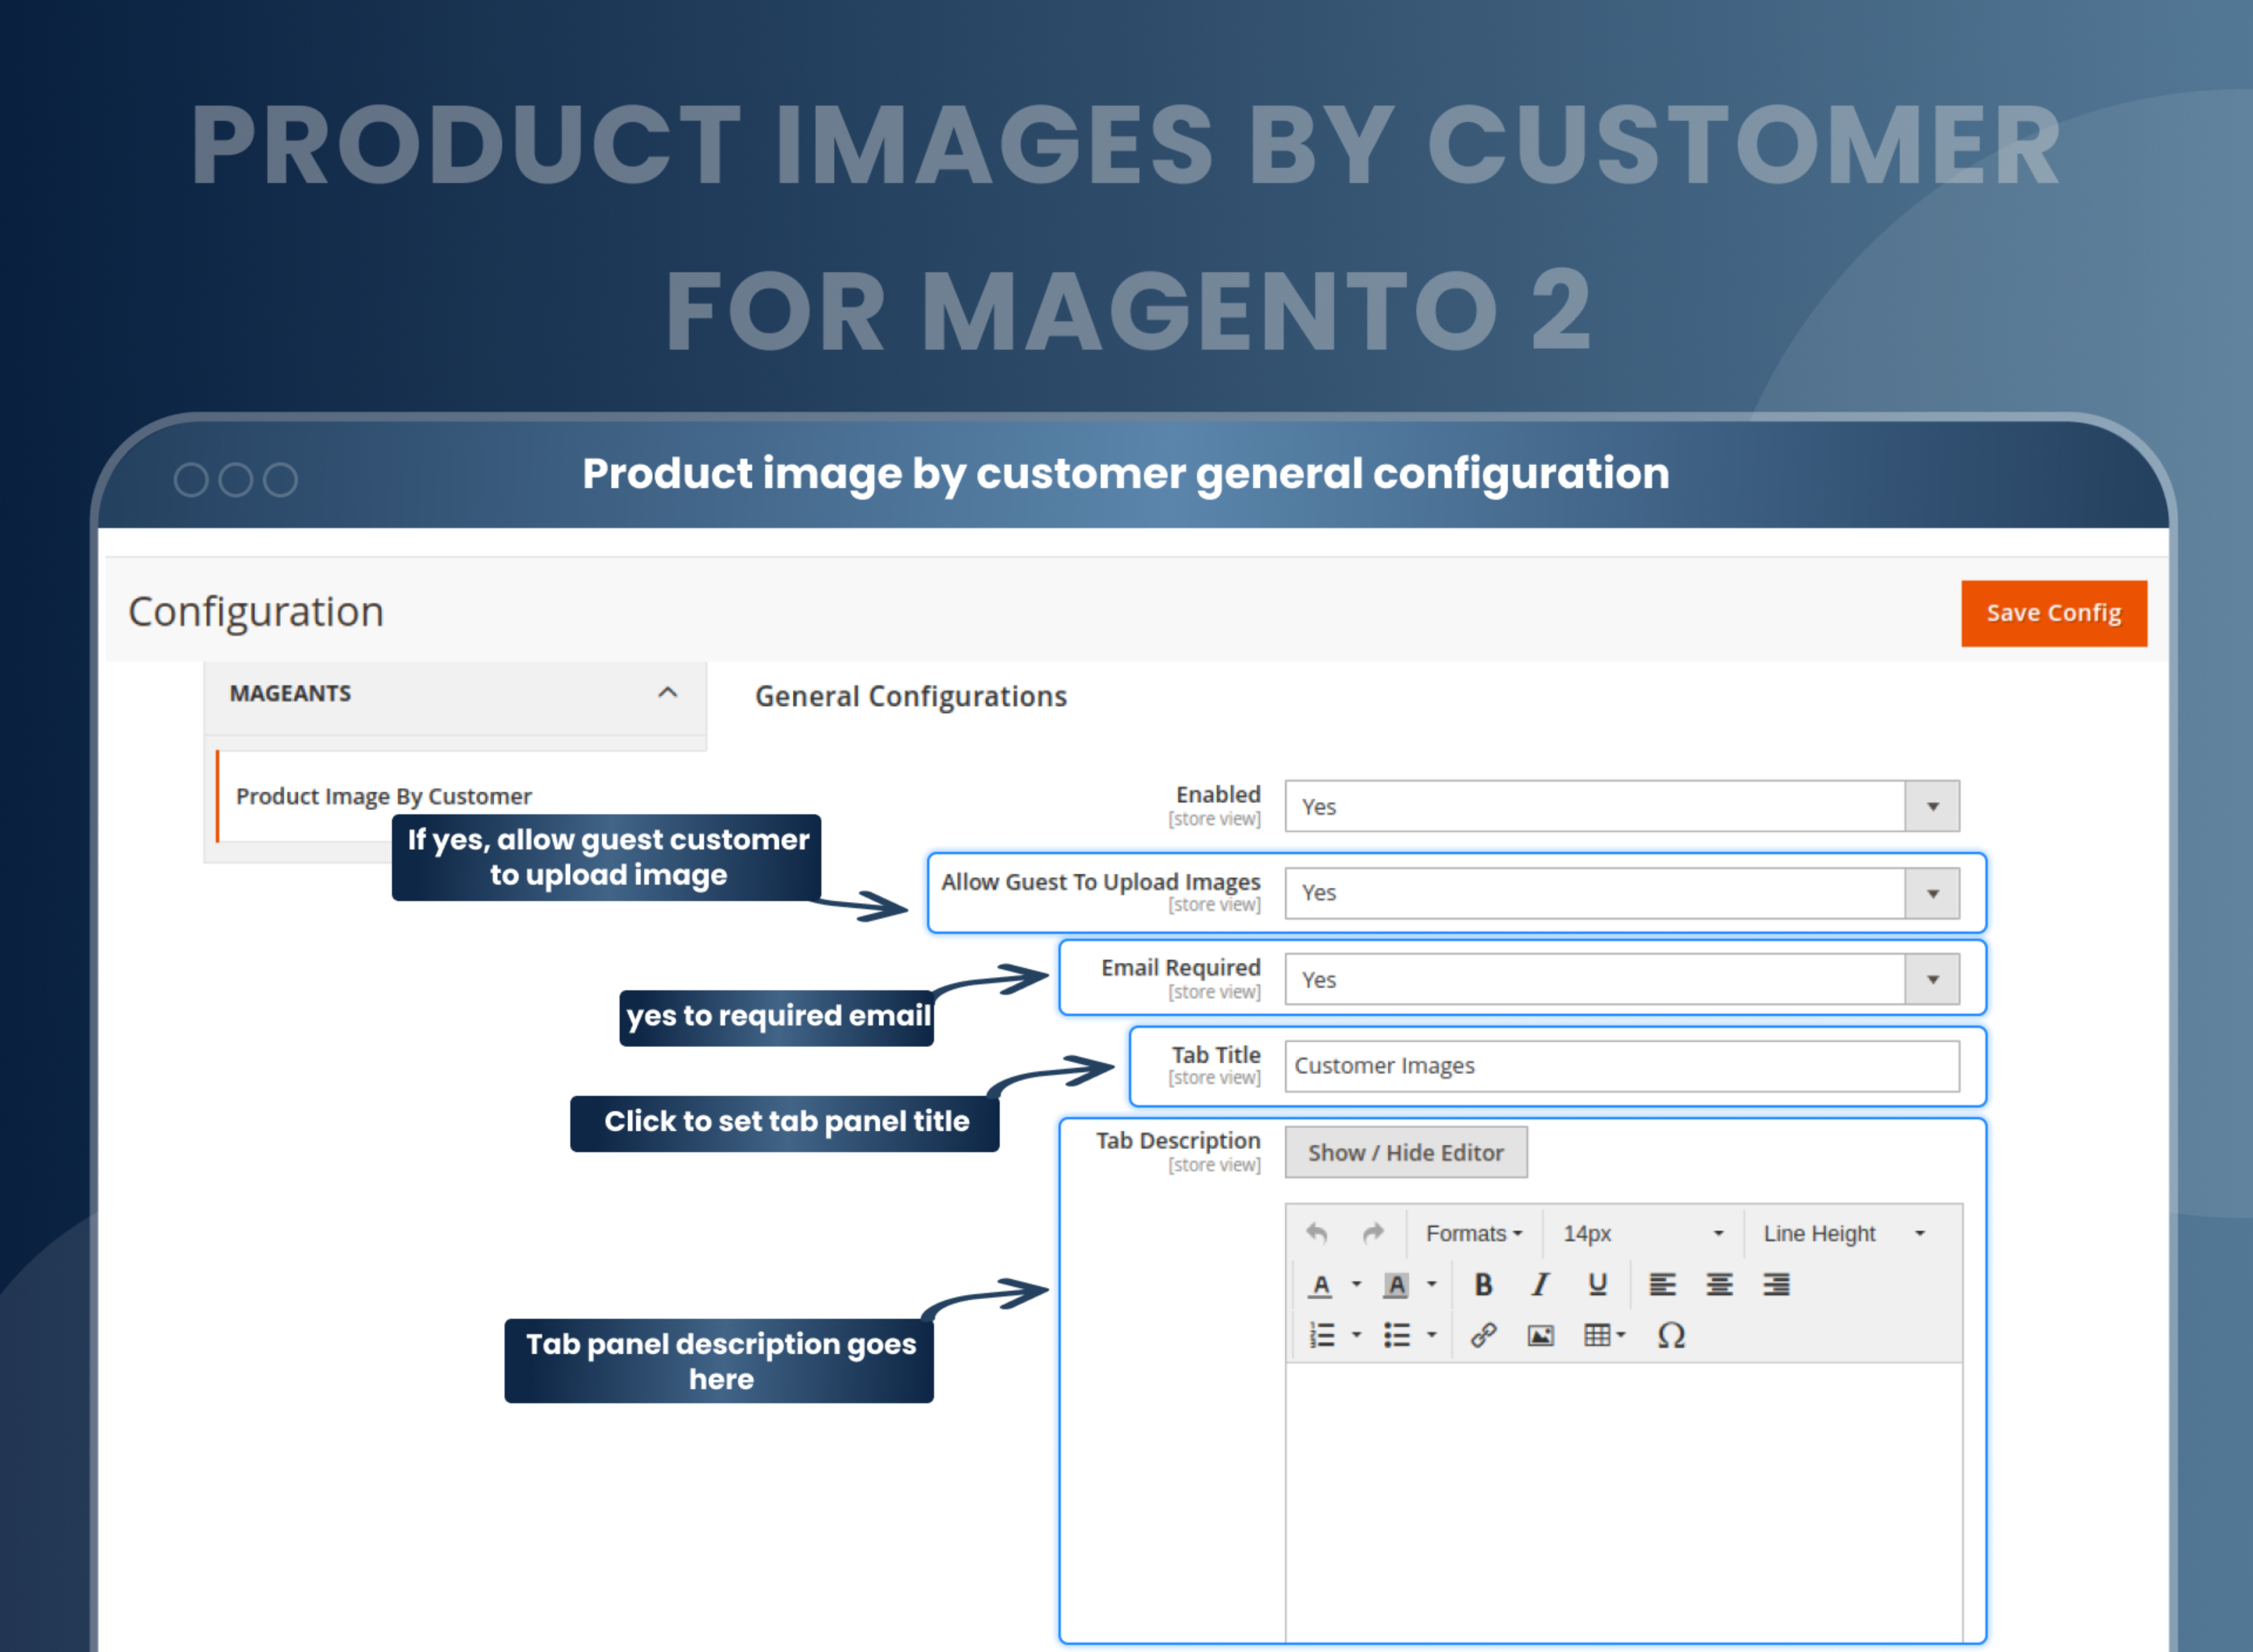 Product image by customer general configuration